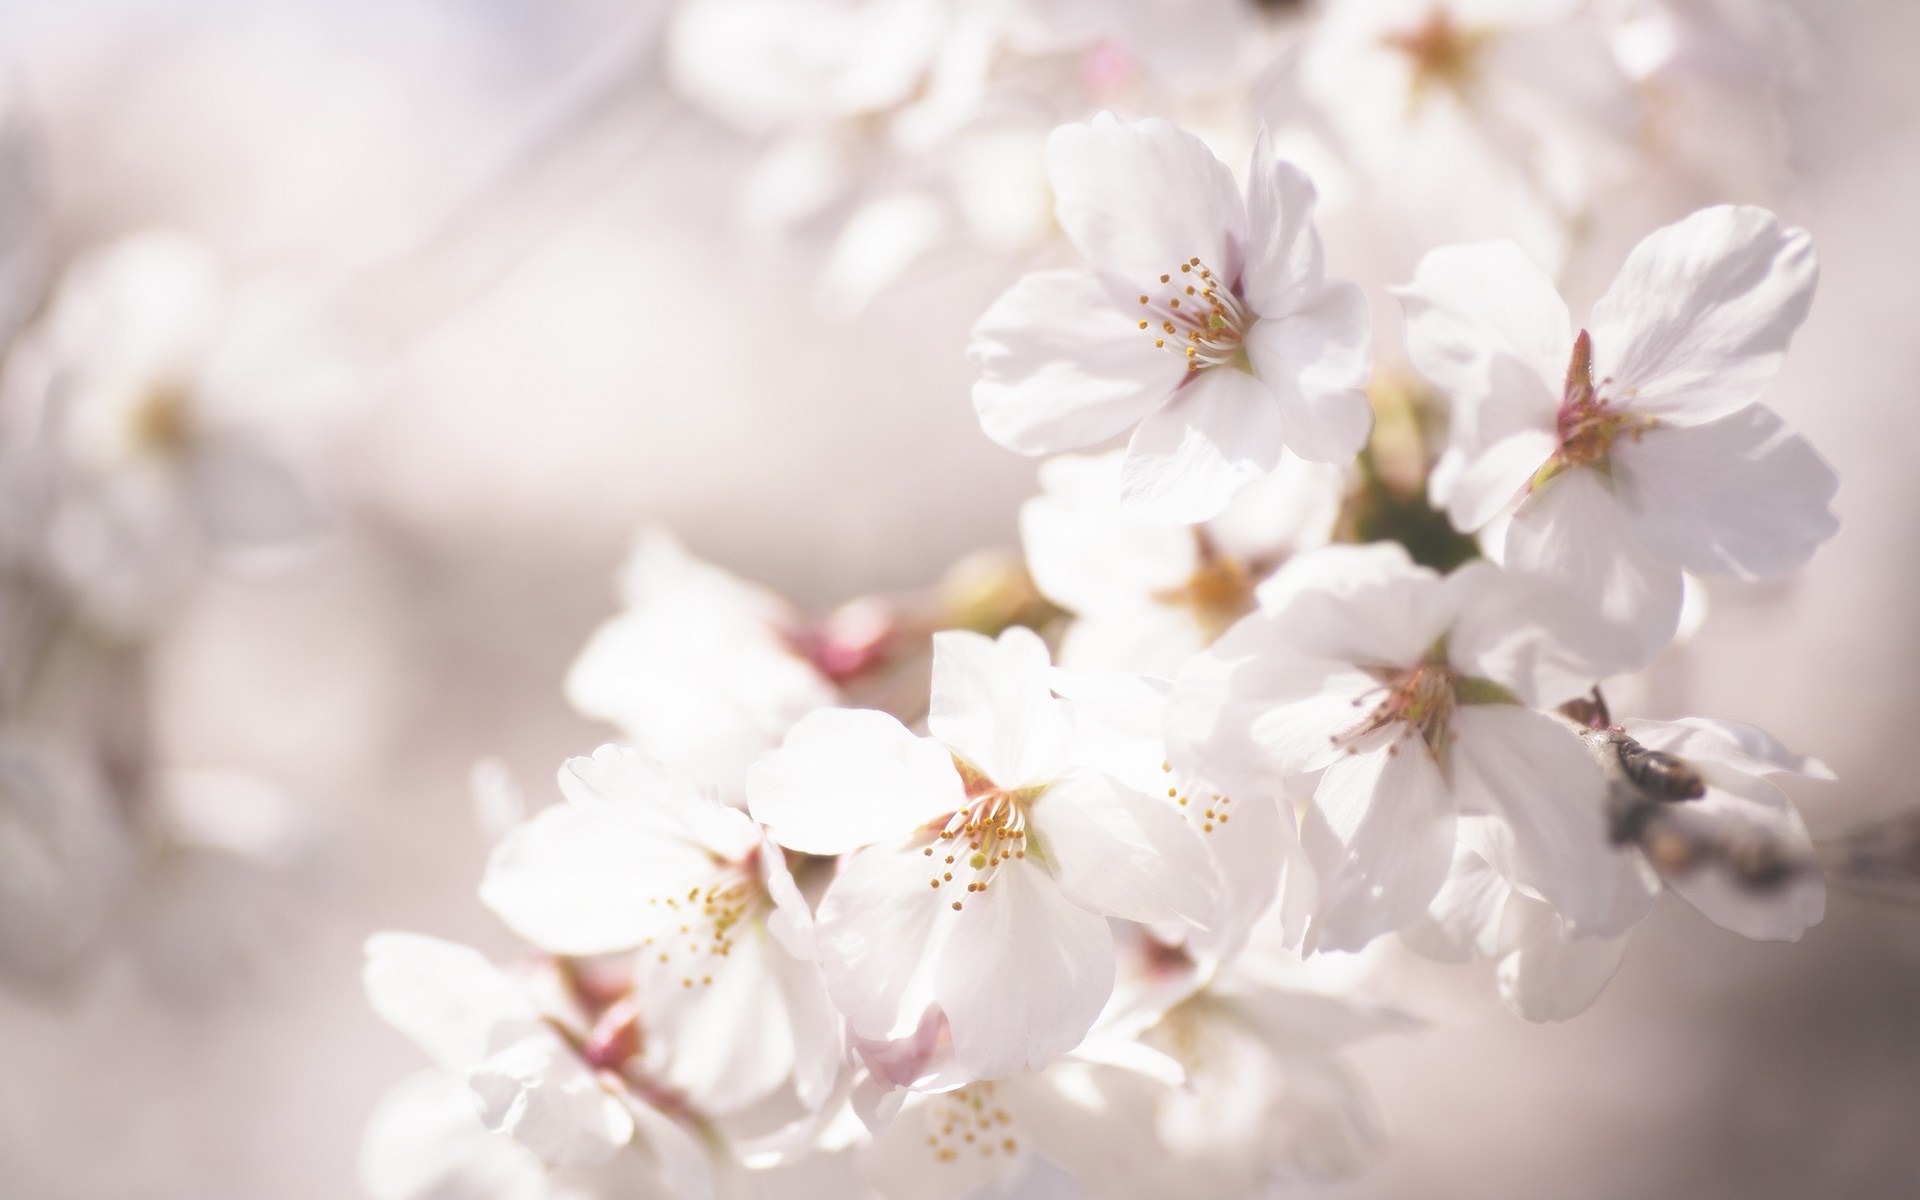 Beautiful Cherry Blossom Branch Wallpapers